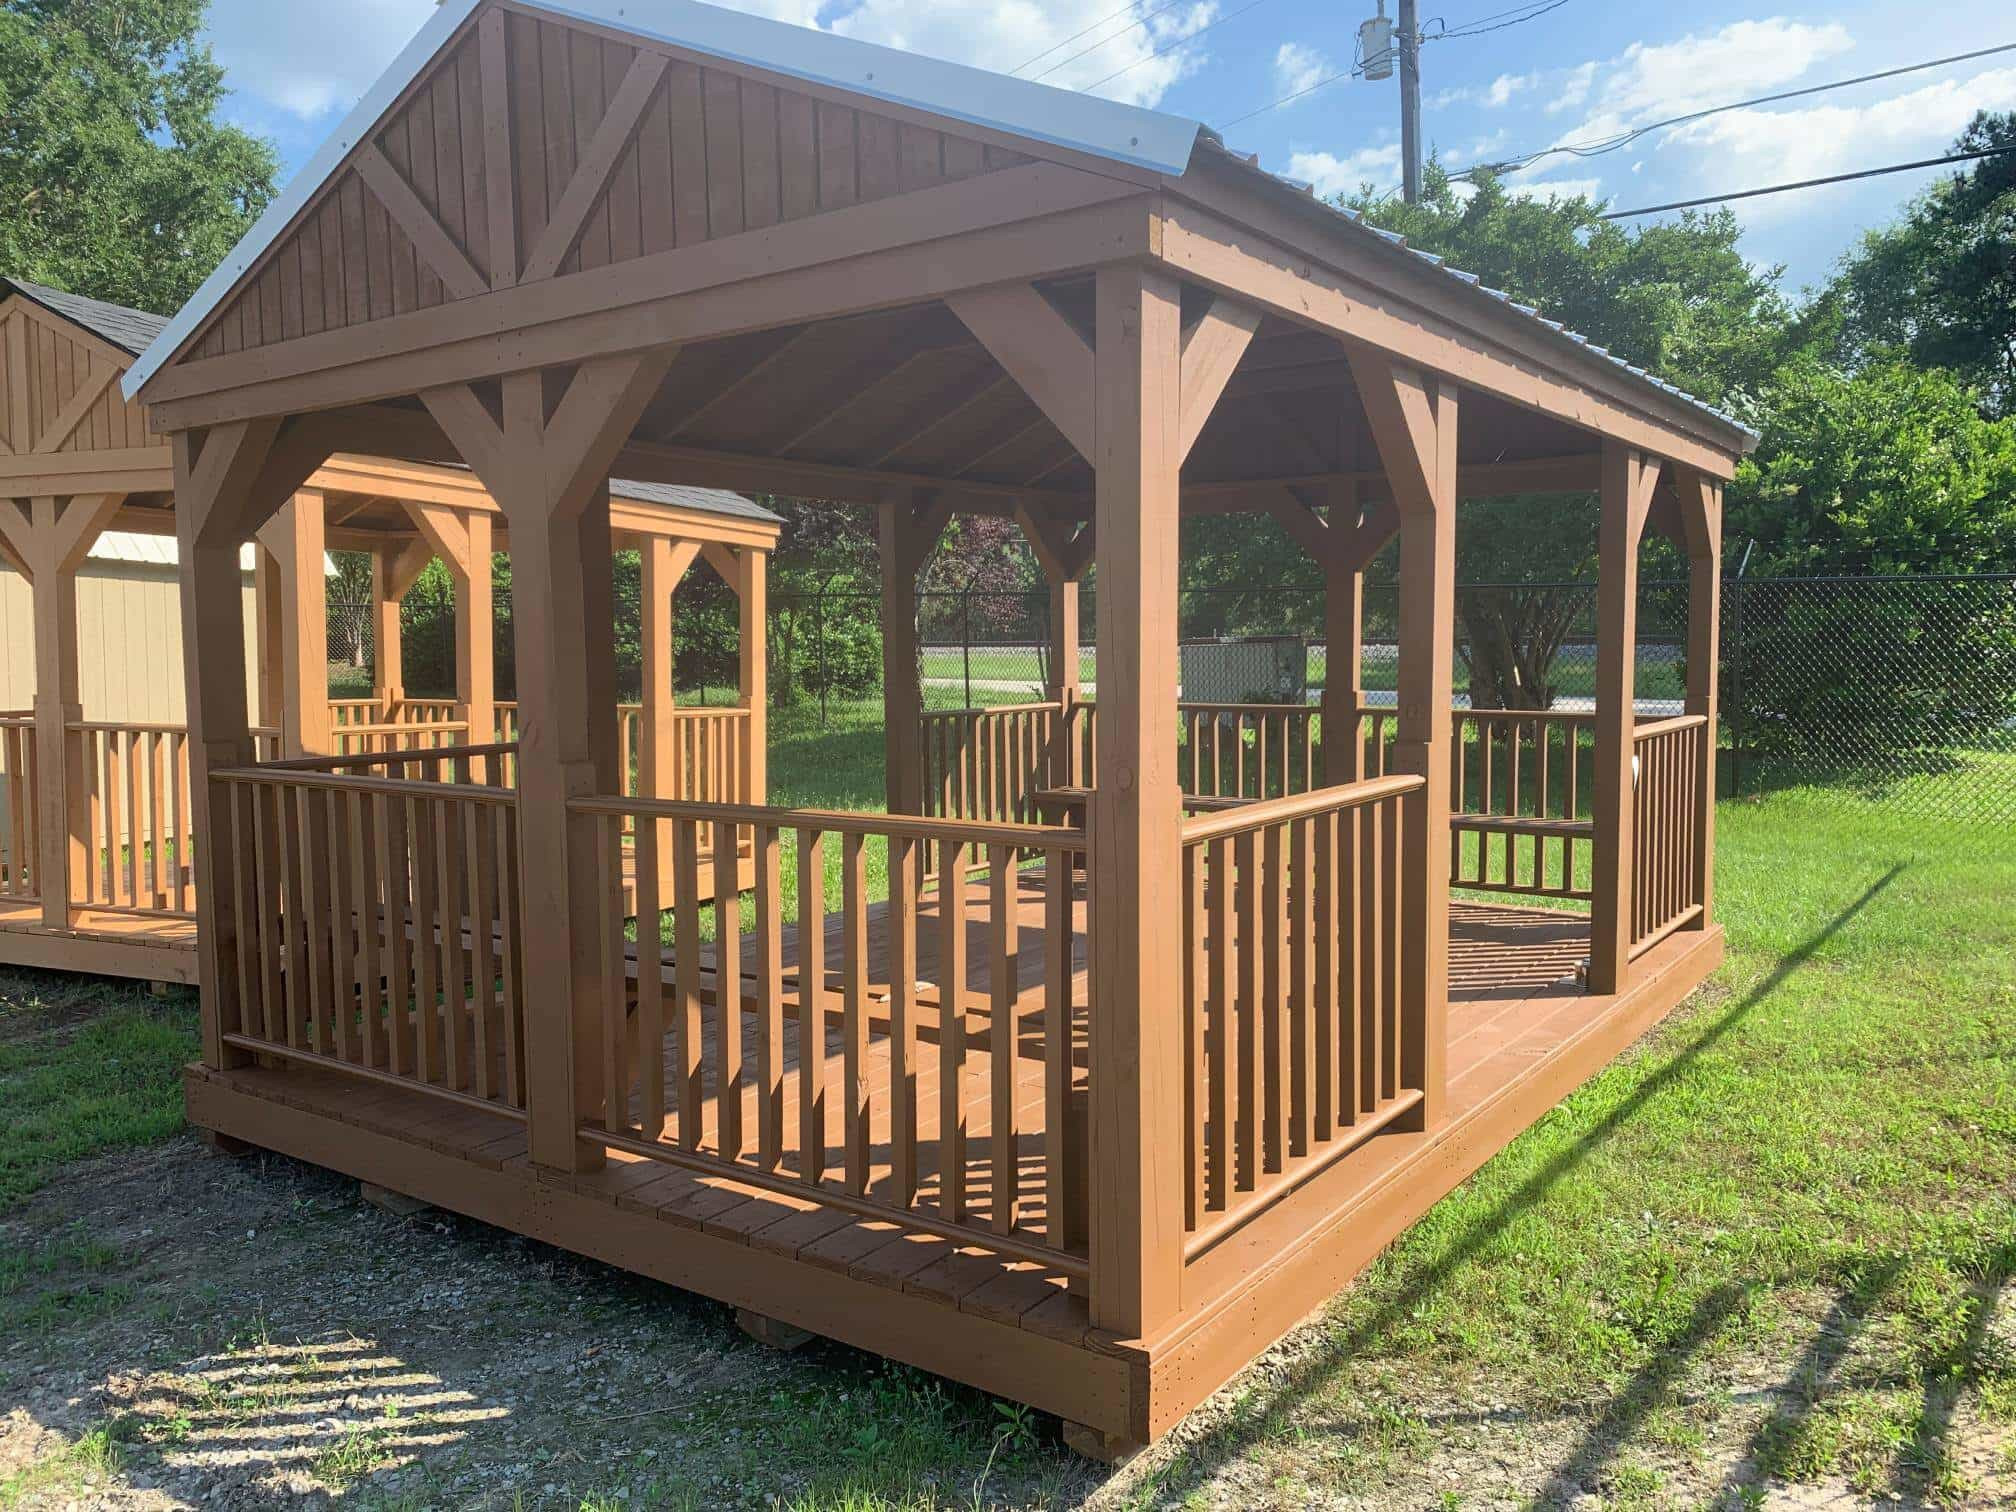 Backyard Cabanas For Sale
 Wooden Backyard Cabana for Sale in Georgia Free Delivery